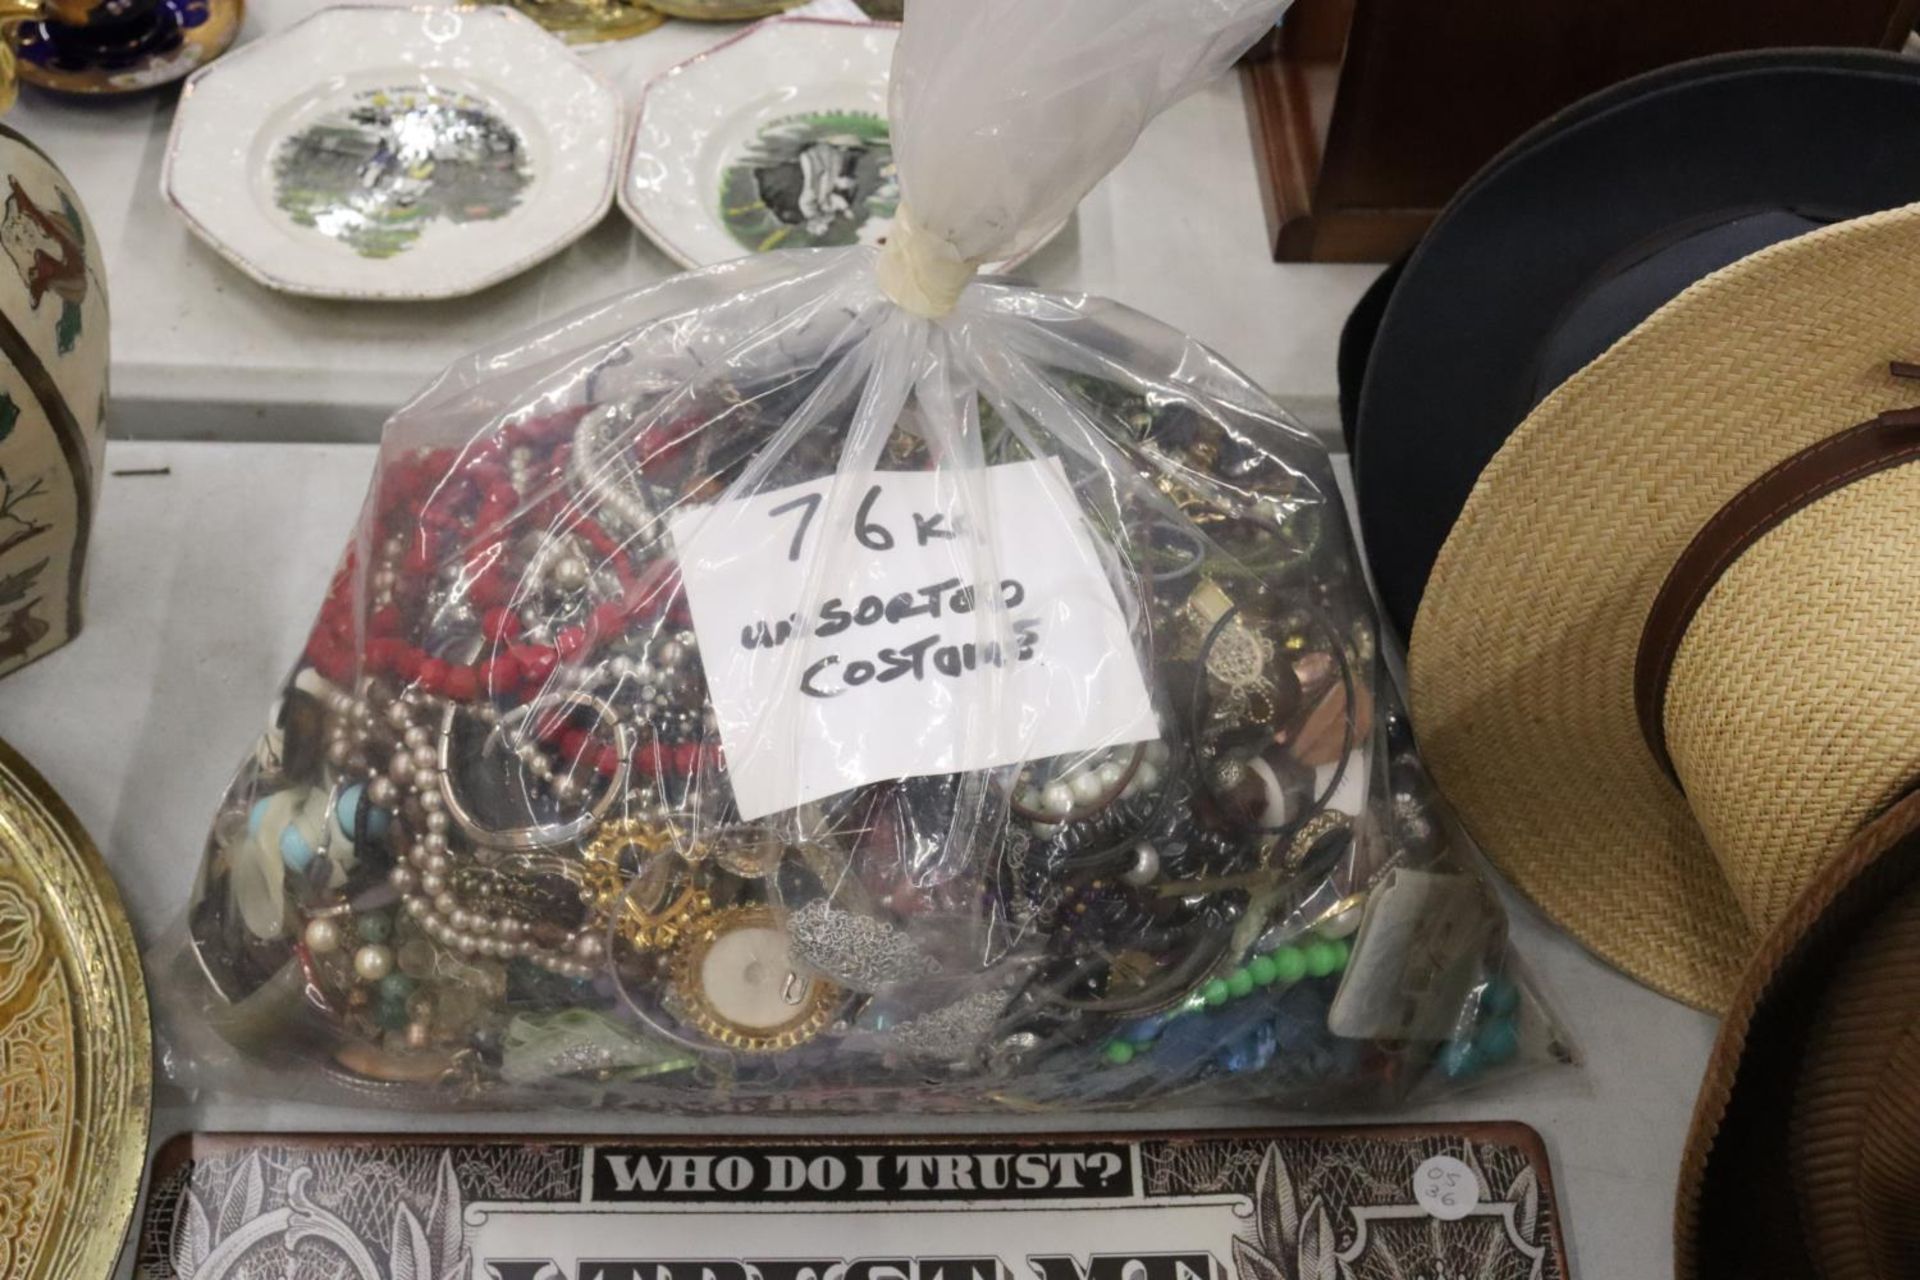 A 7.6 KG BAG OF UNSORTED COSTUME JEWELLERY